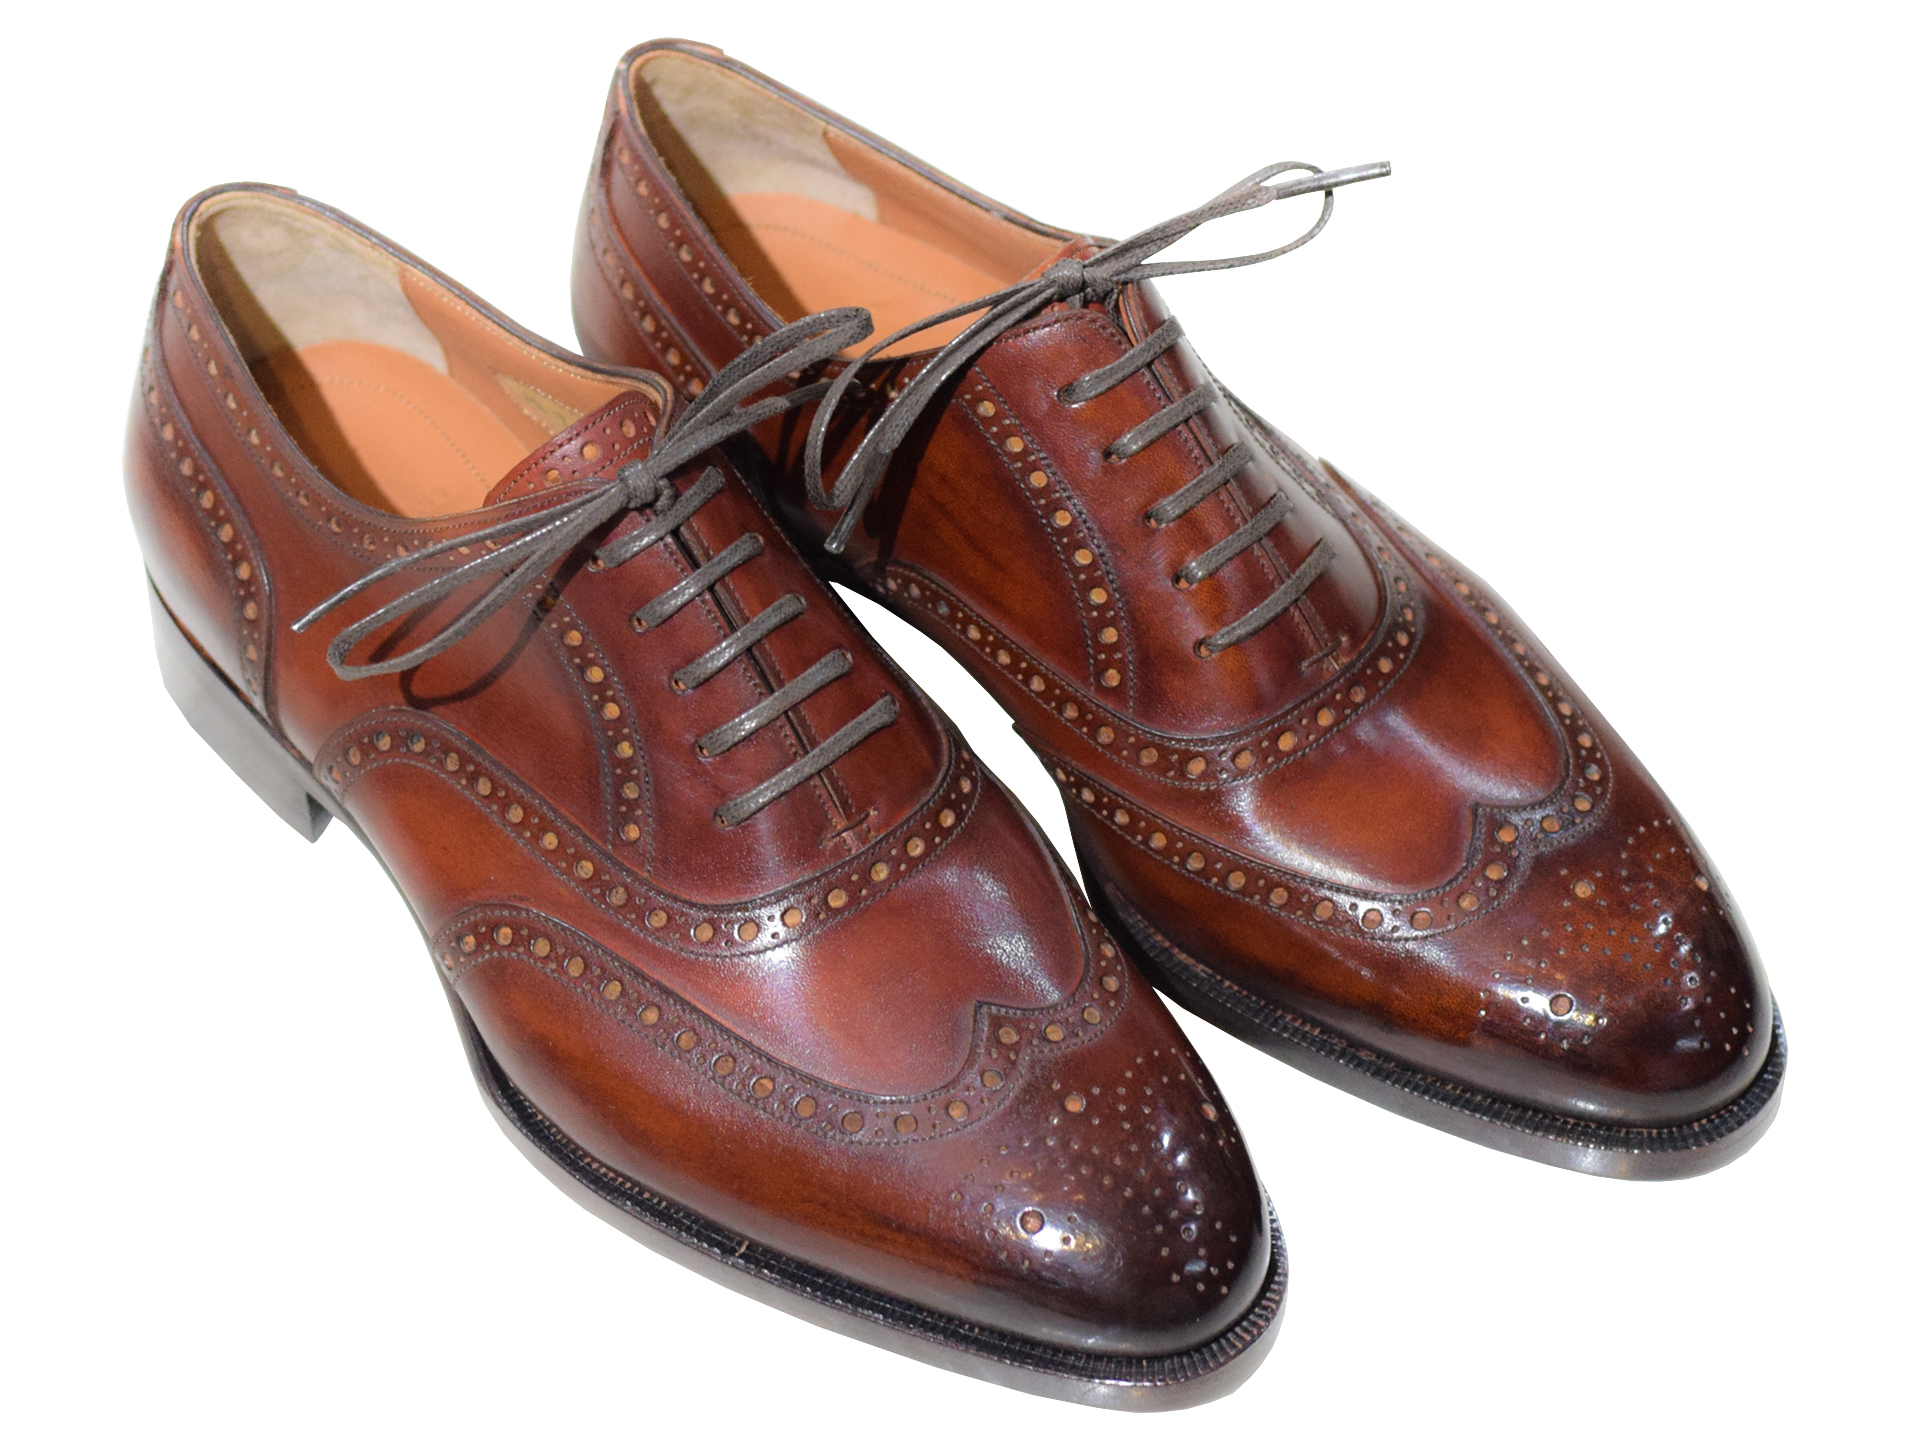 MTO Oxford wingtip full brogue shoes